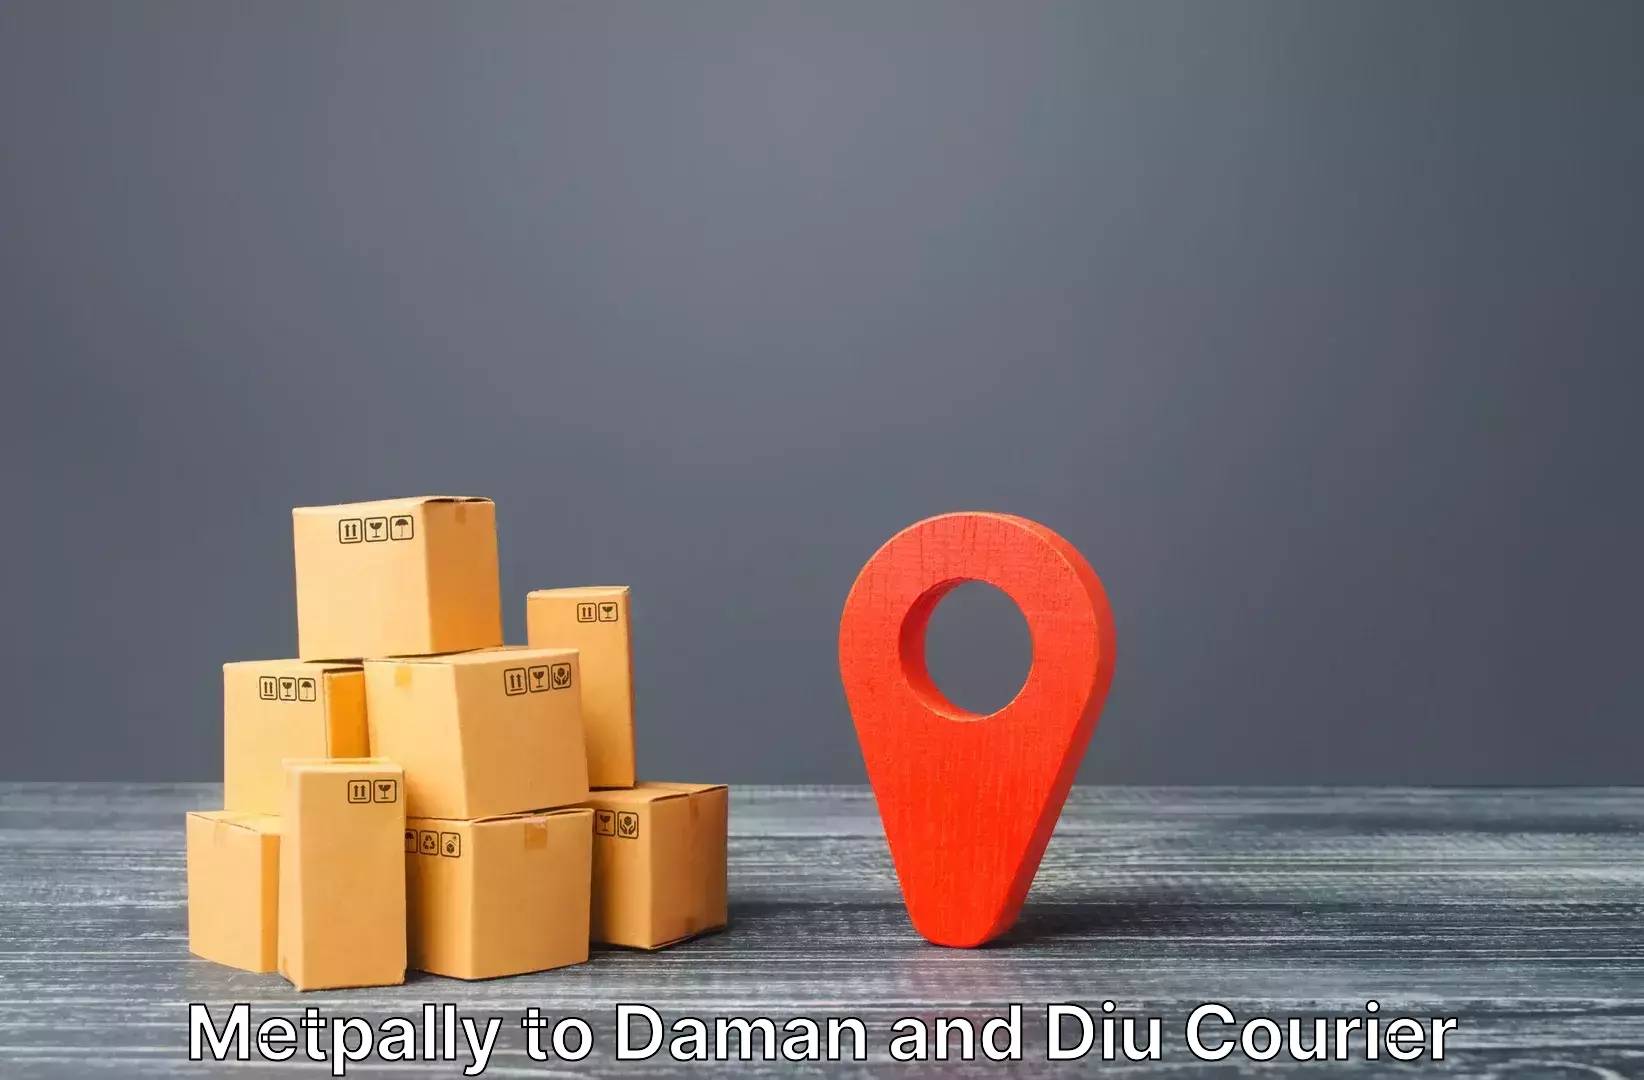 Personal effects shipping Metpally to Diu